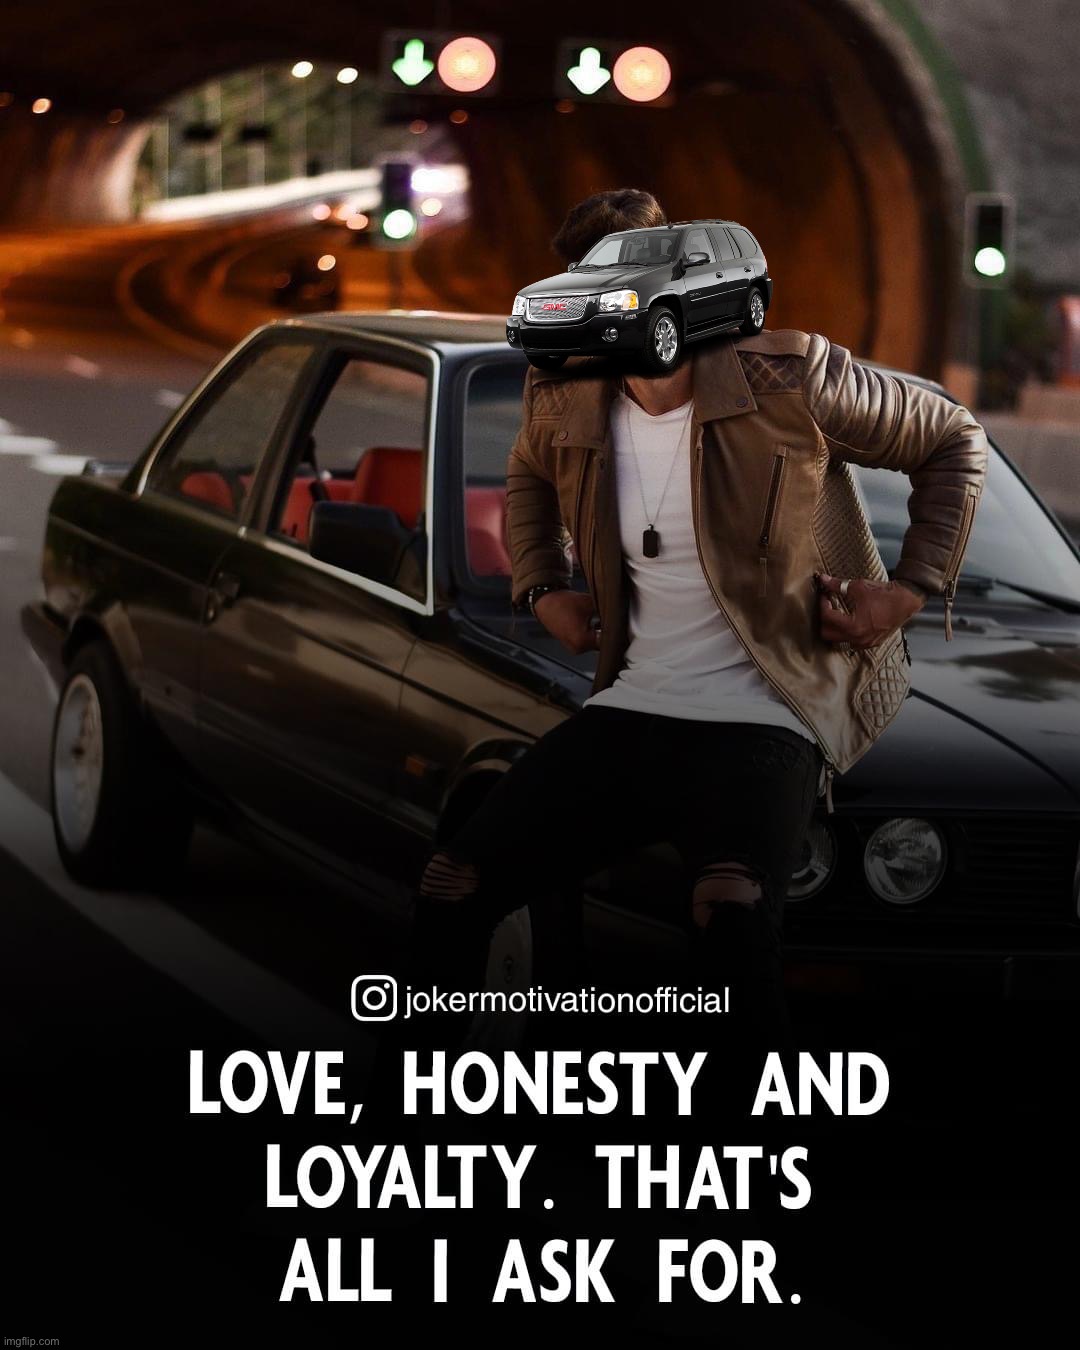 Seems legit | image tagged in love honesty and loyalty,love,honesty,loyalty,seems,legit | made w/ Imgflip meme maker